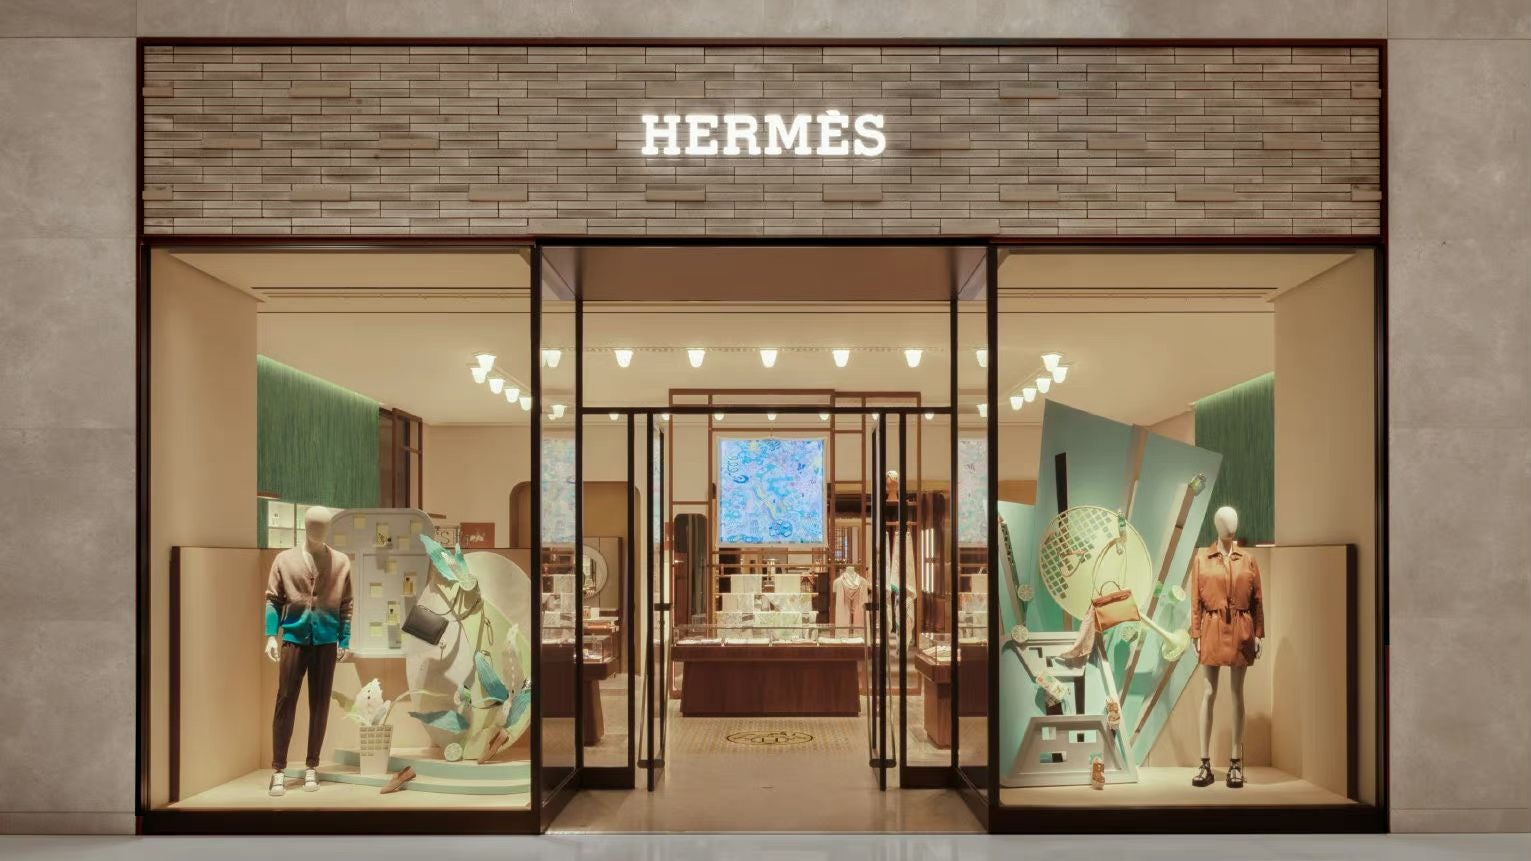 Unfazed By The Resumption Of Outbound Travel, Hermès and LV Boost China Expansion Plans